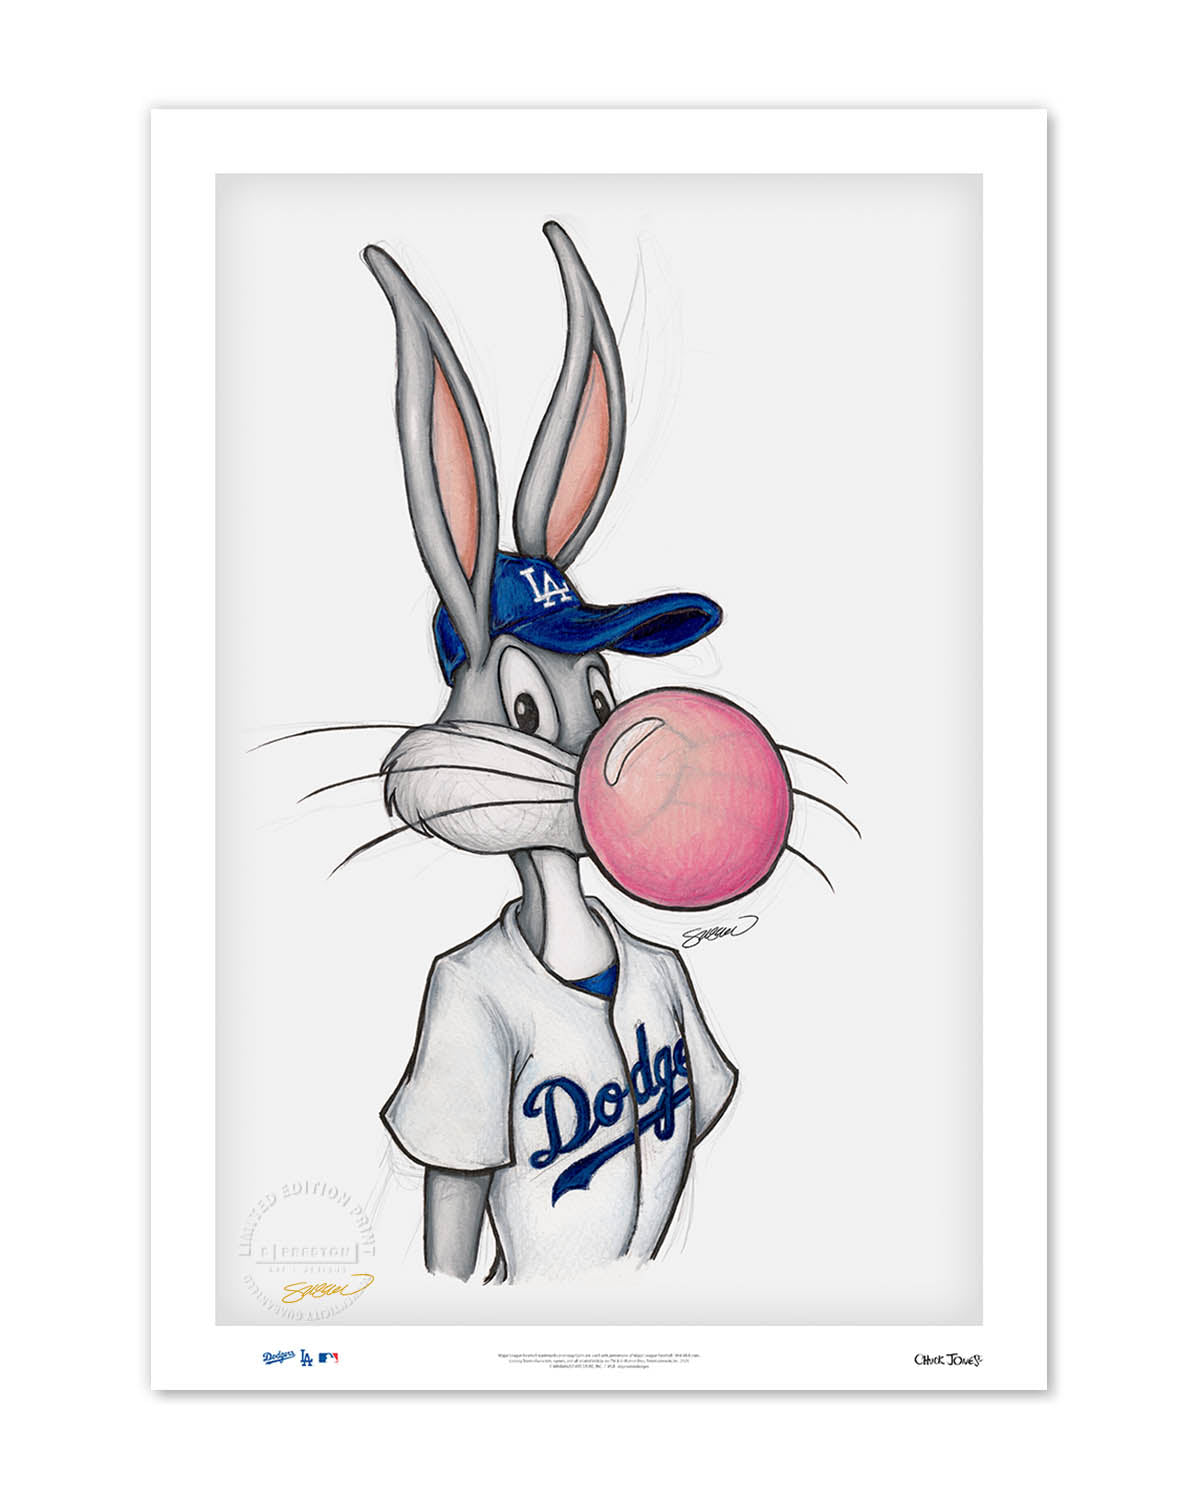 Shop our huge selection of the best Los Angeles Dodgers Pro